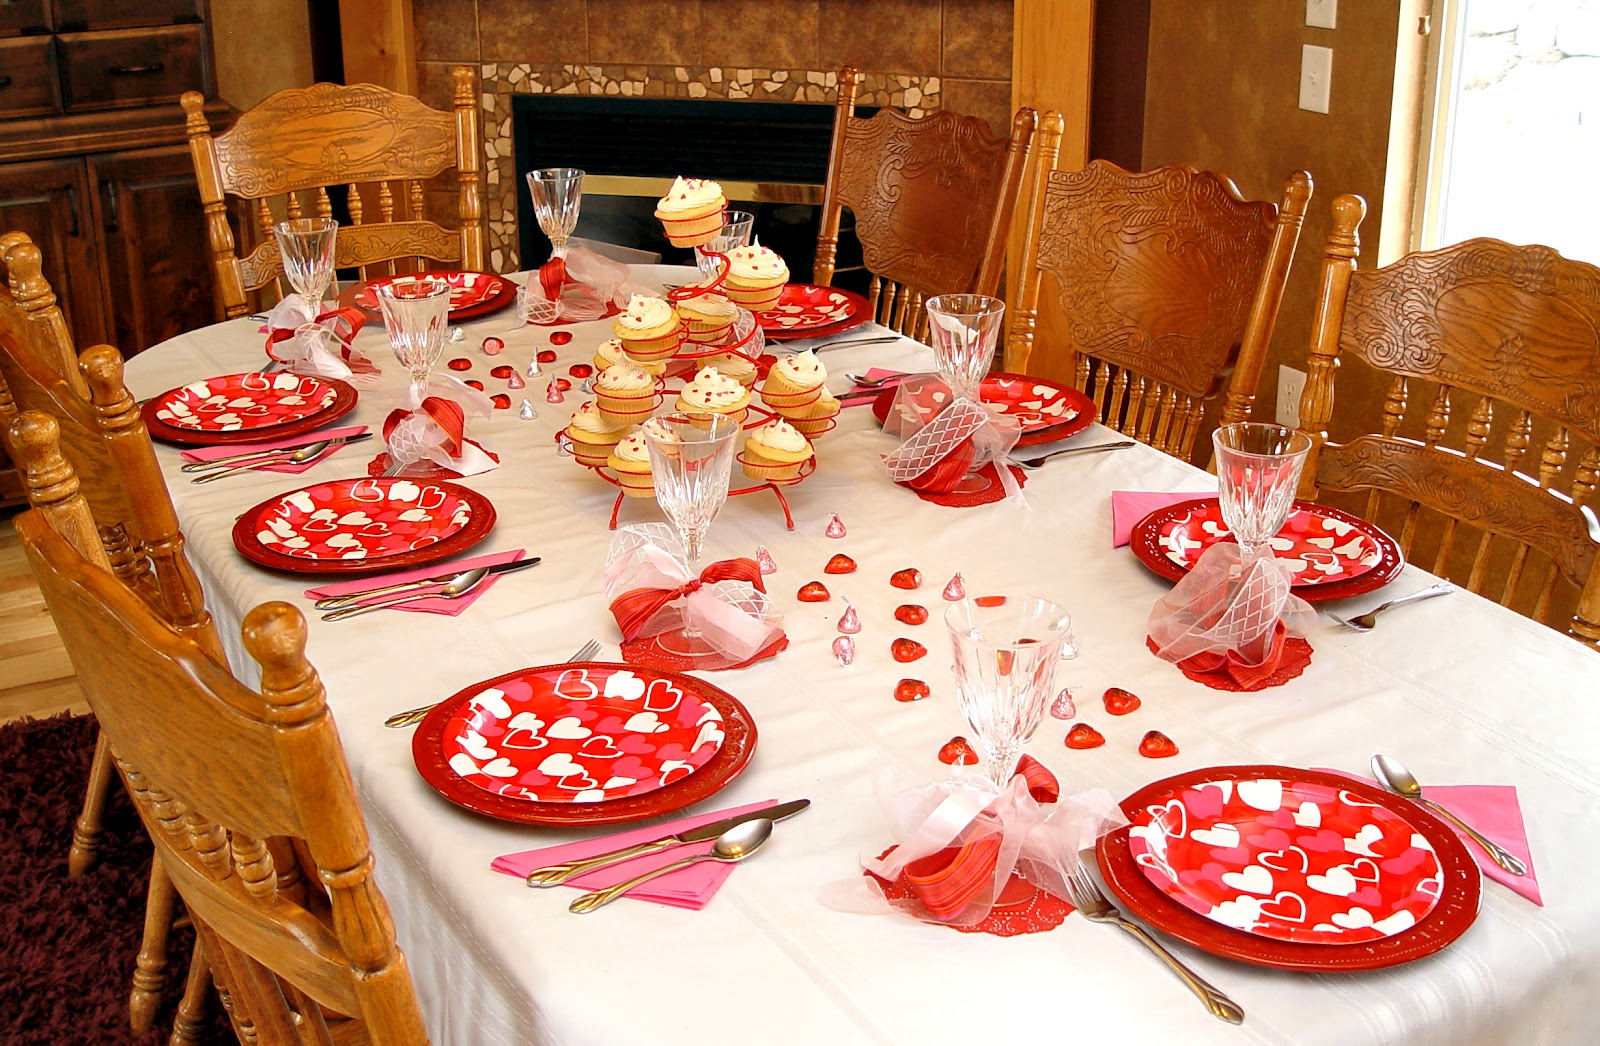 Family Valentines Dinner Idea and How To Make A Junk Bow